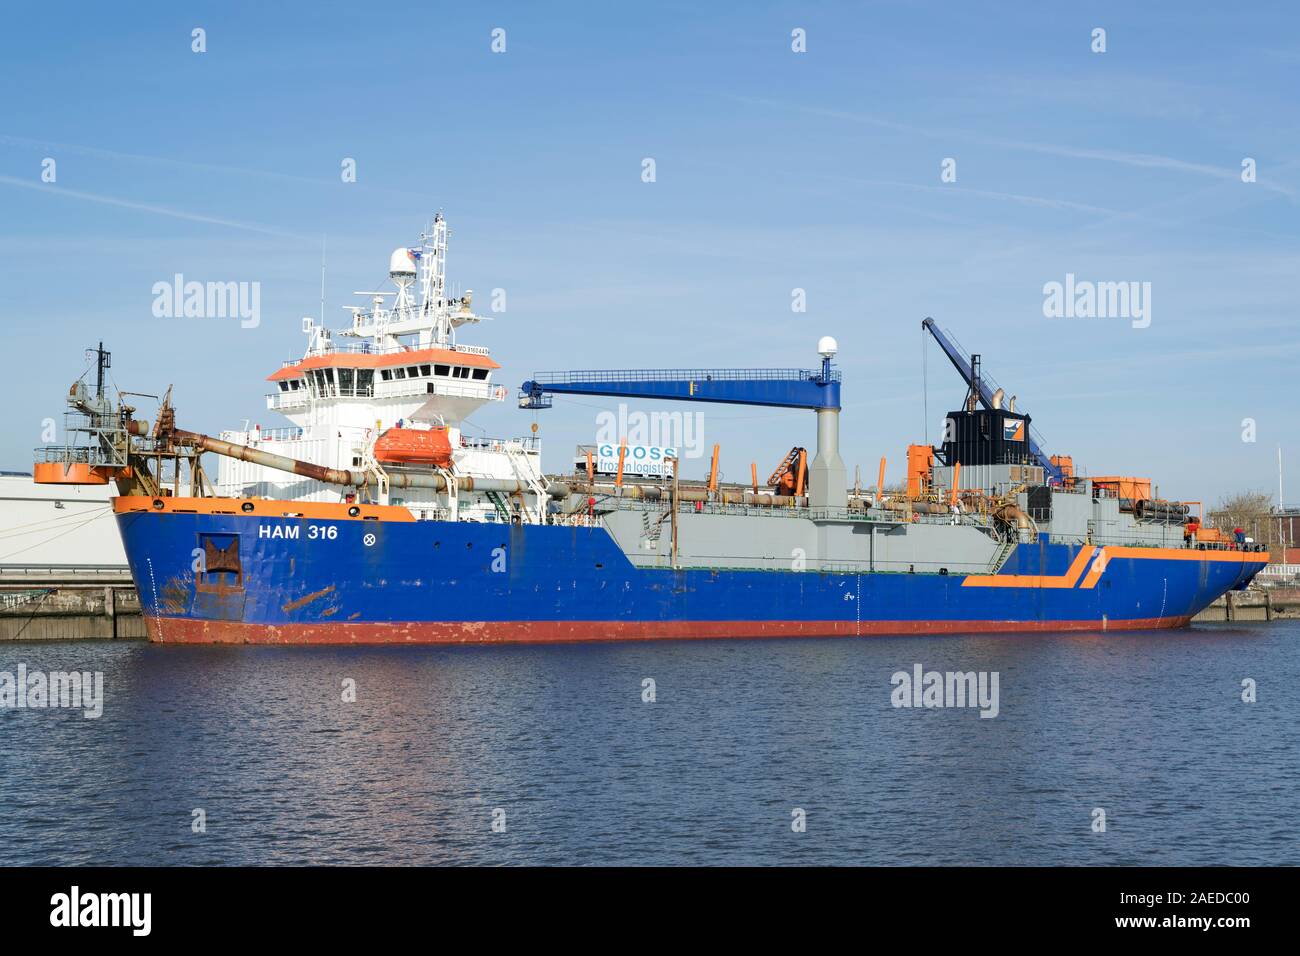 trailing suction hopper dredger HAM 316 operated by Van Oord, a Dutch contracting company with one of the world's largest dredging fleets Stock Photo